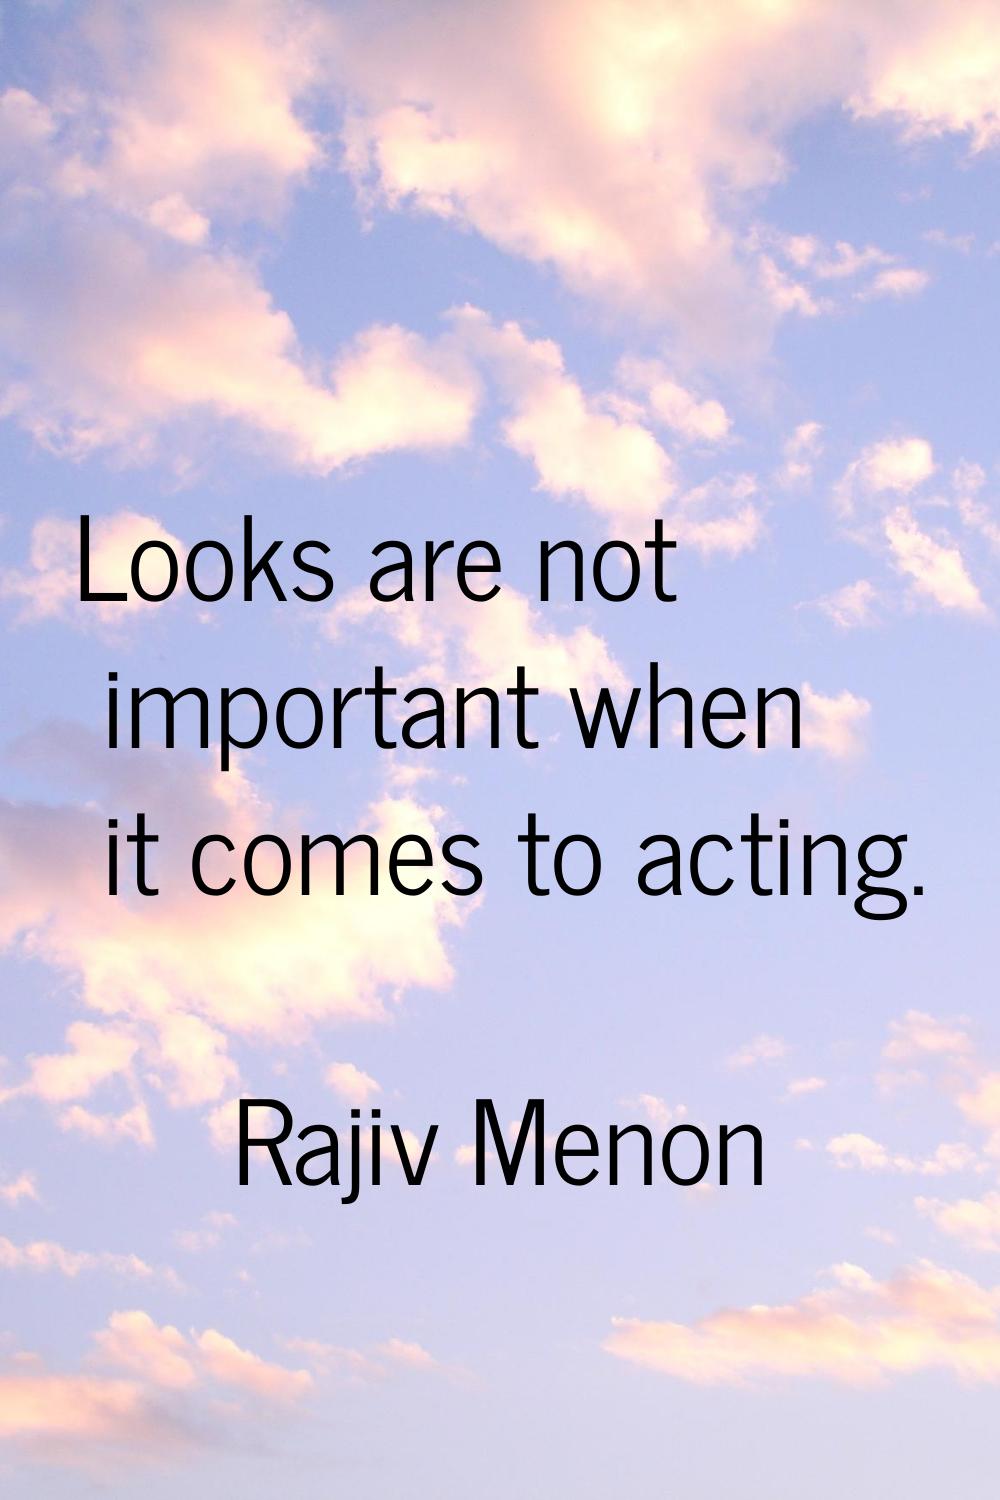 Looks are not important when it comes to acting.